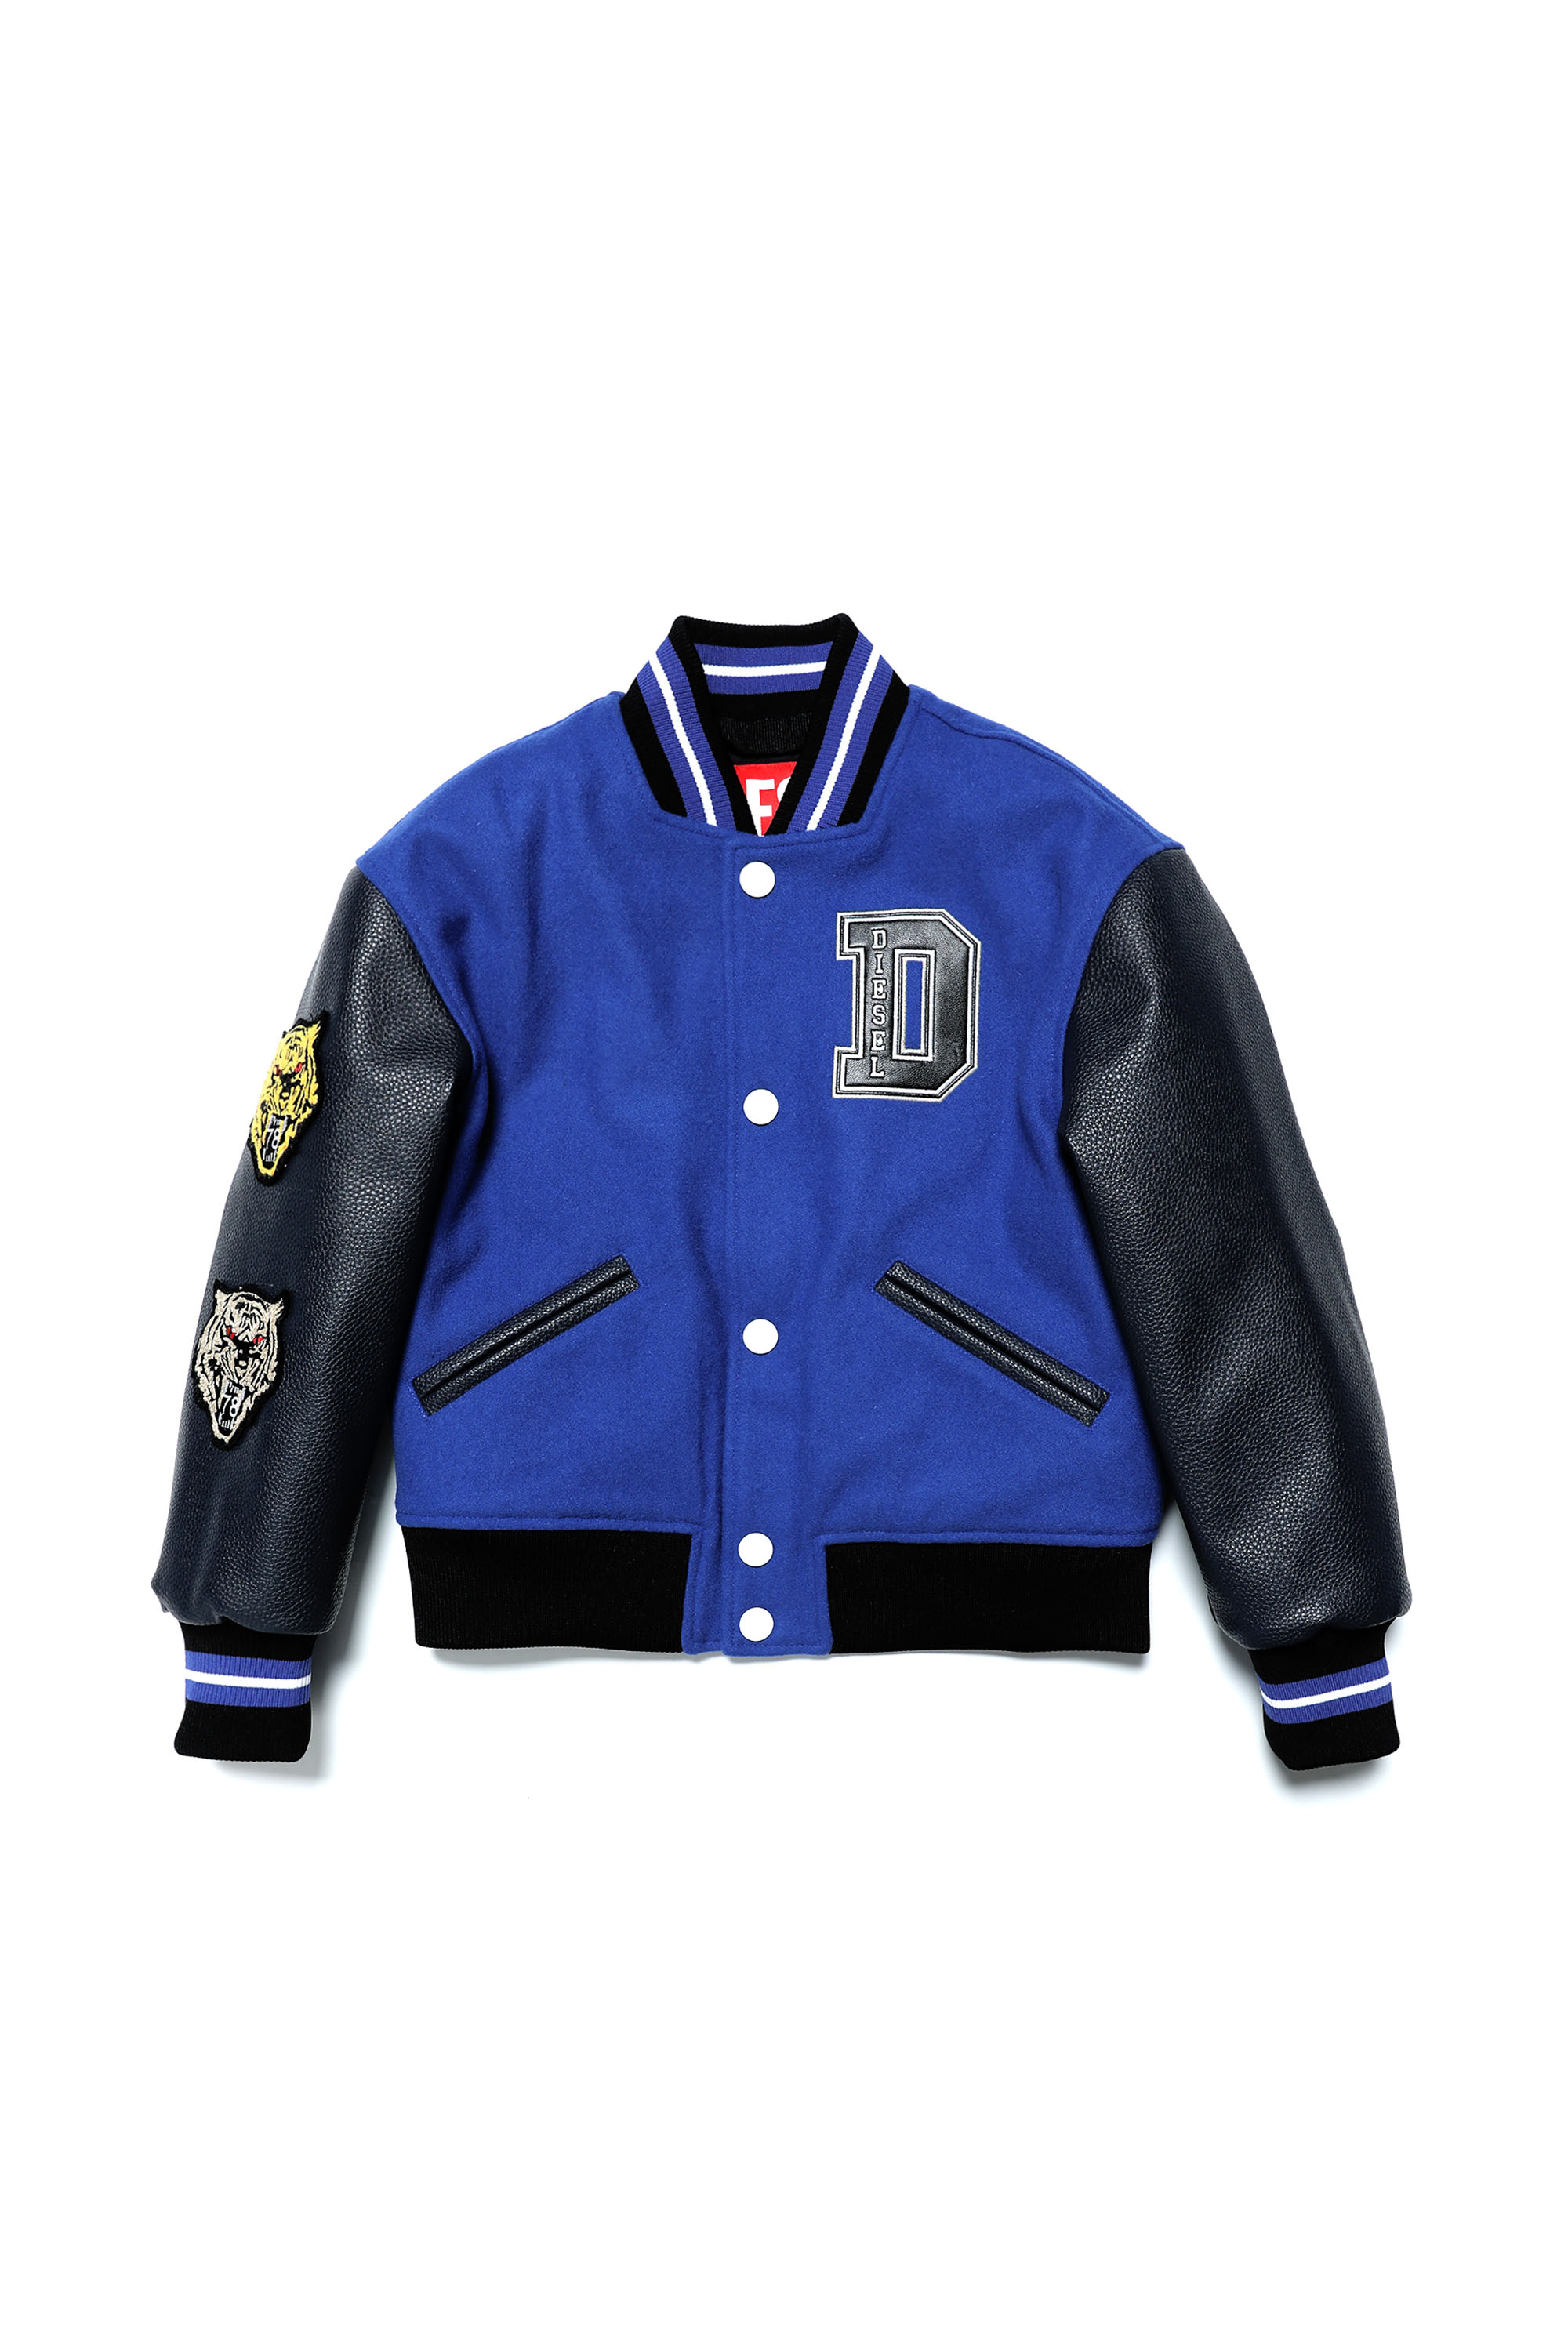 A guest is seen wearing a Louis Vuitton varsity jacket, blue and